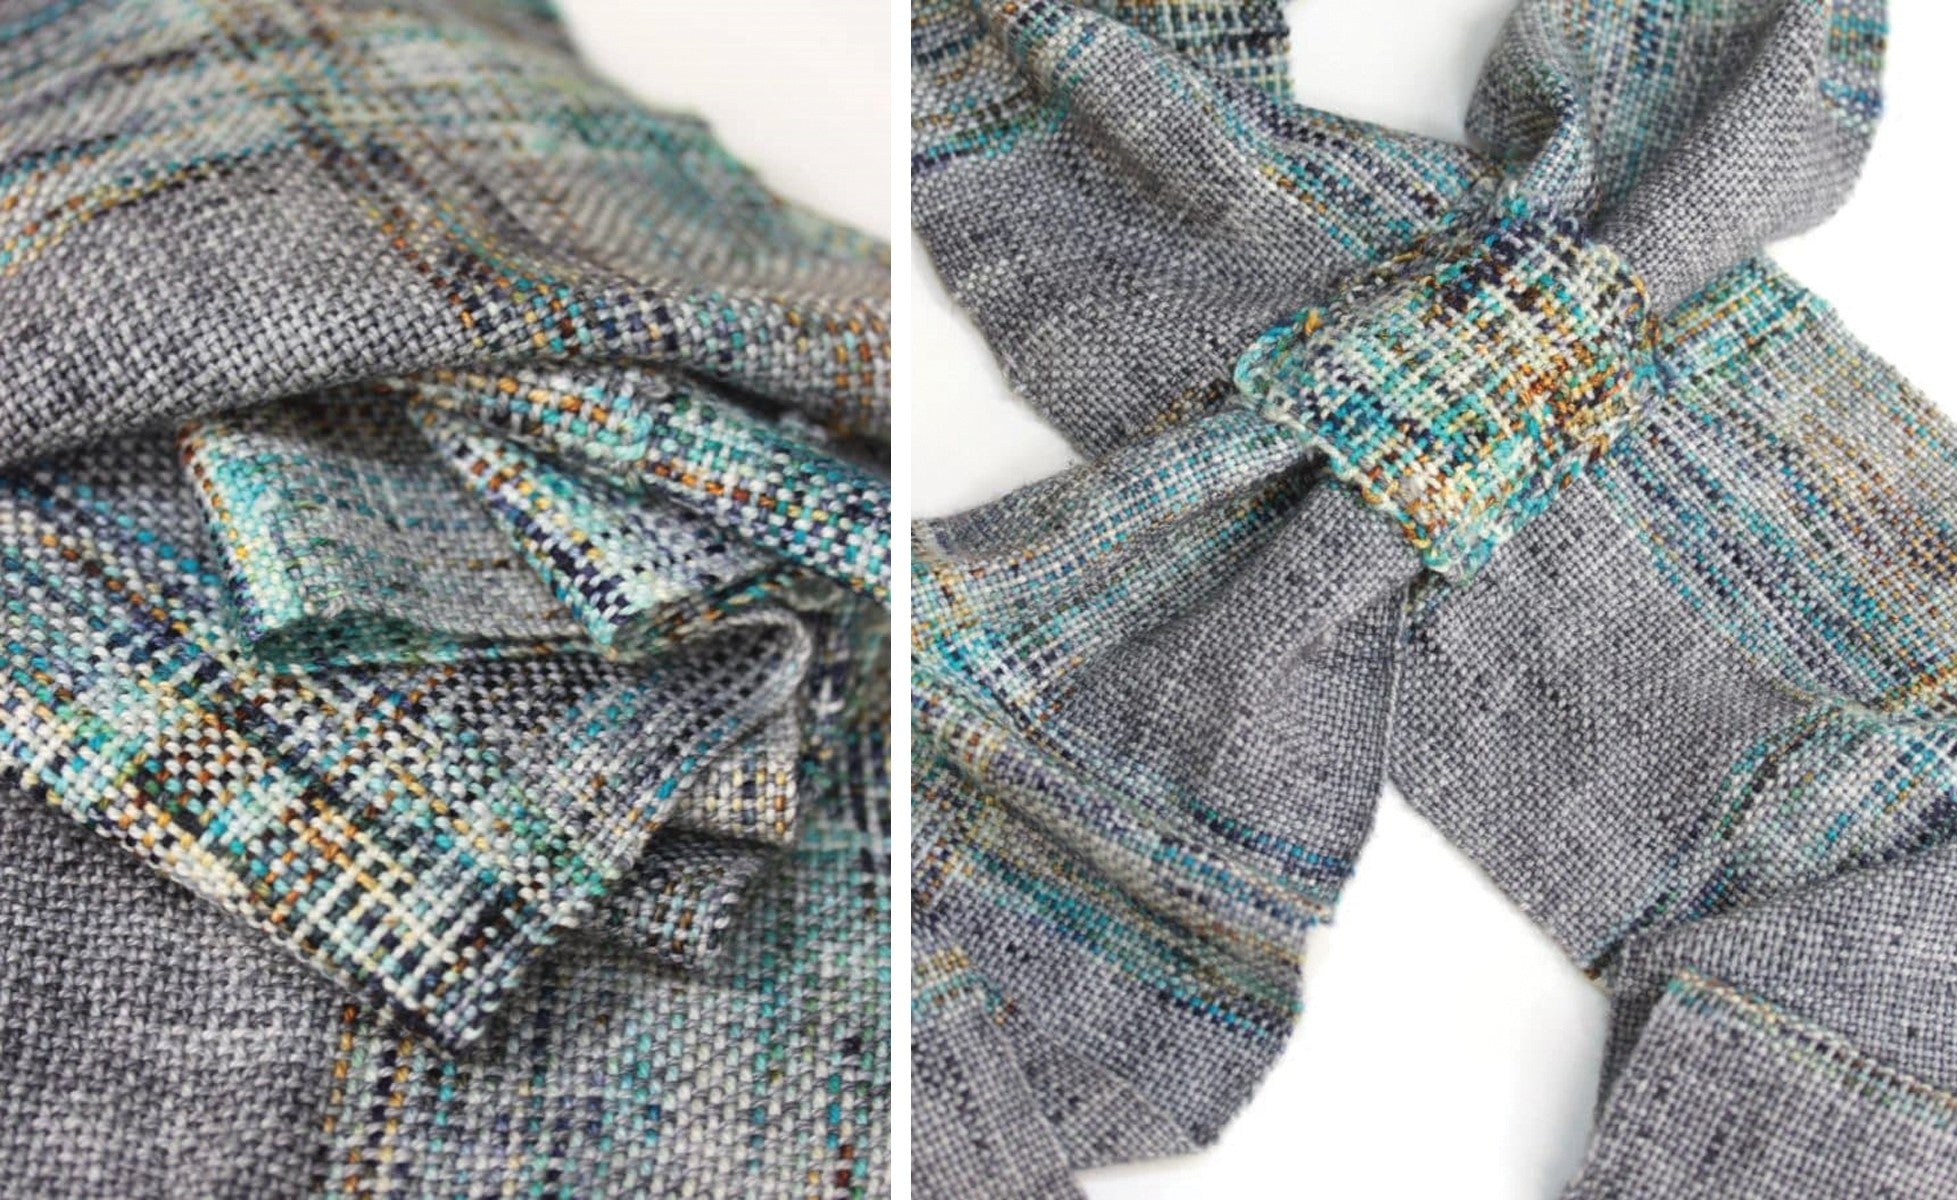 Weaving with Speckled Yarn